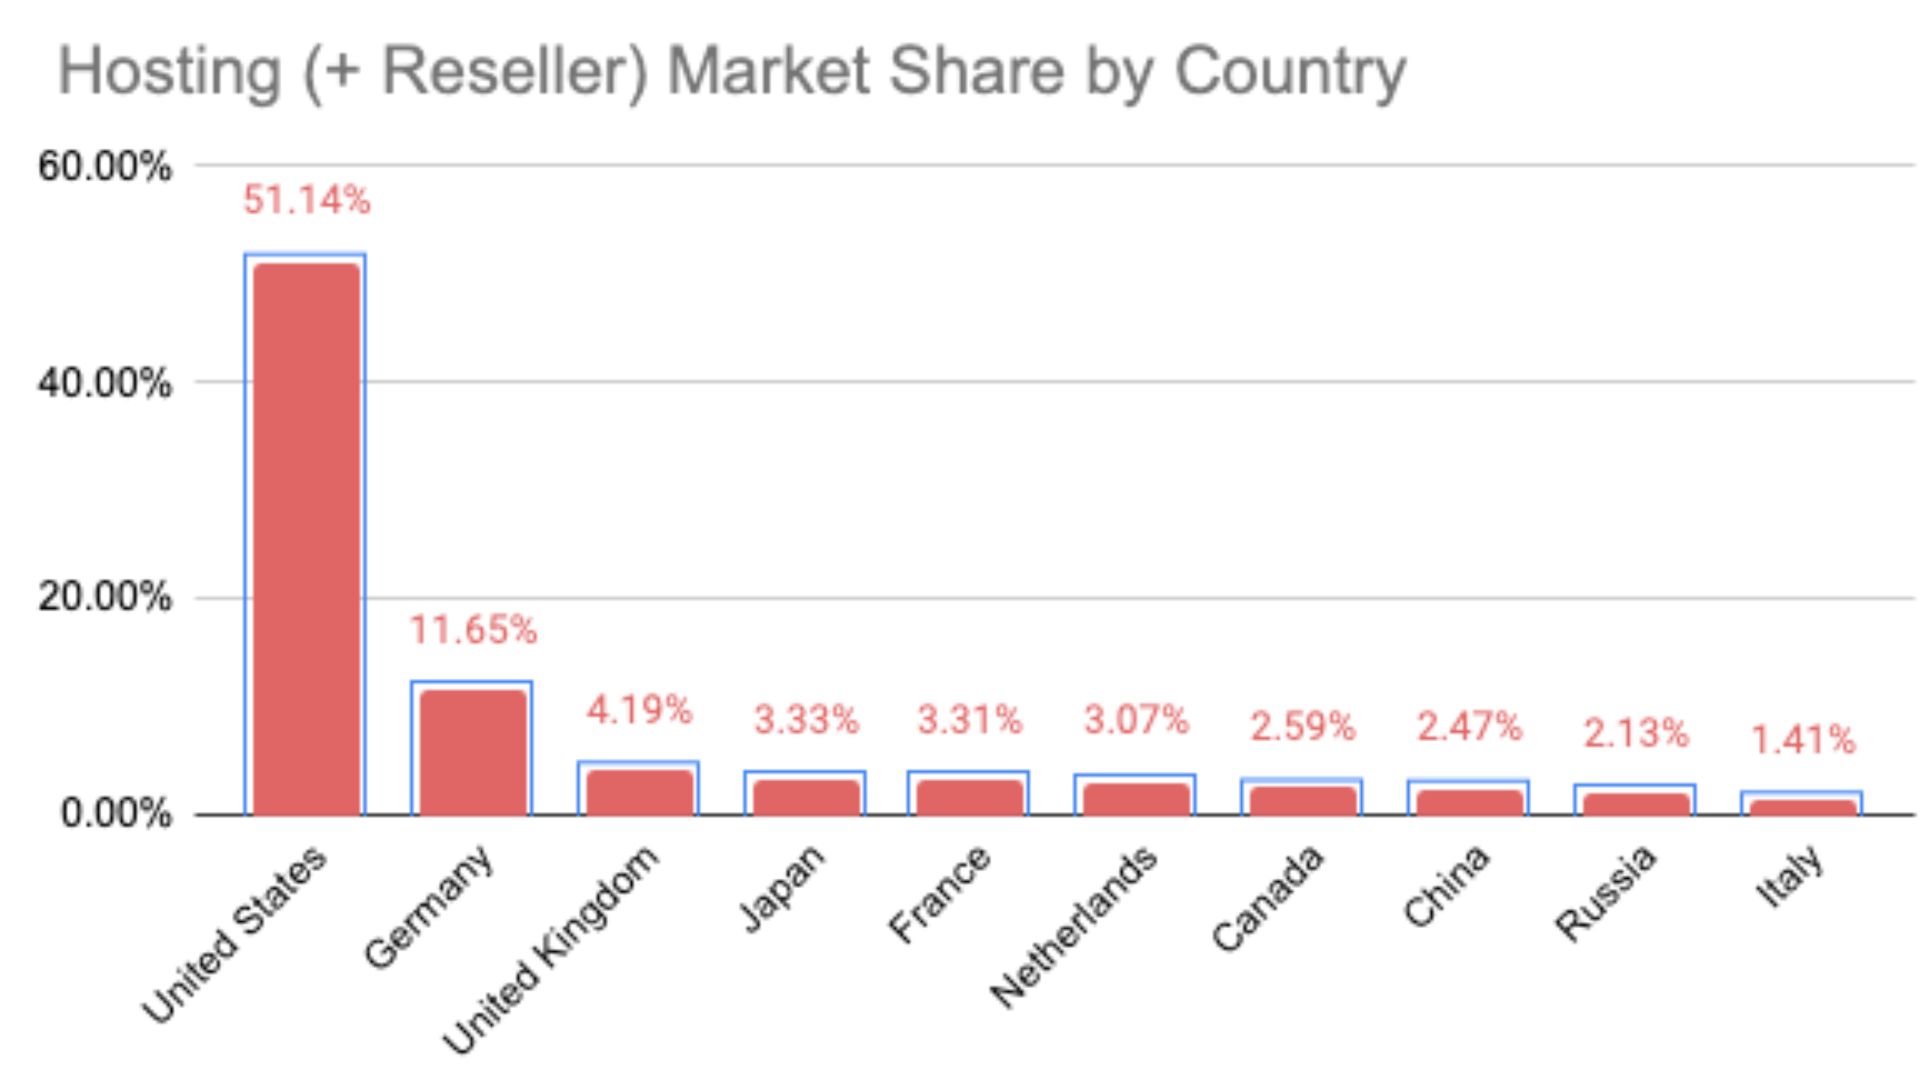 Hosting Market Share By Country